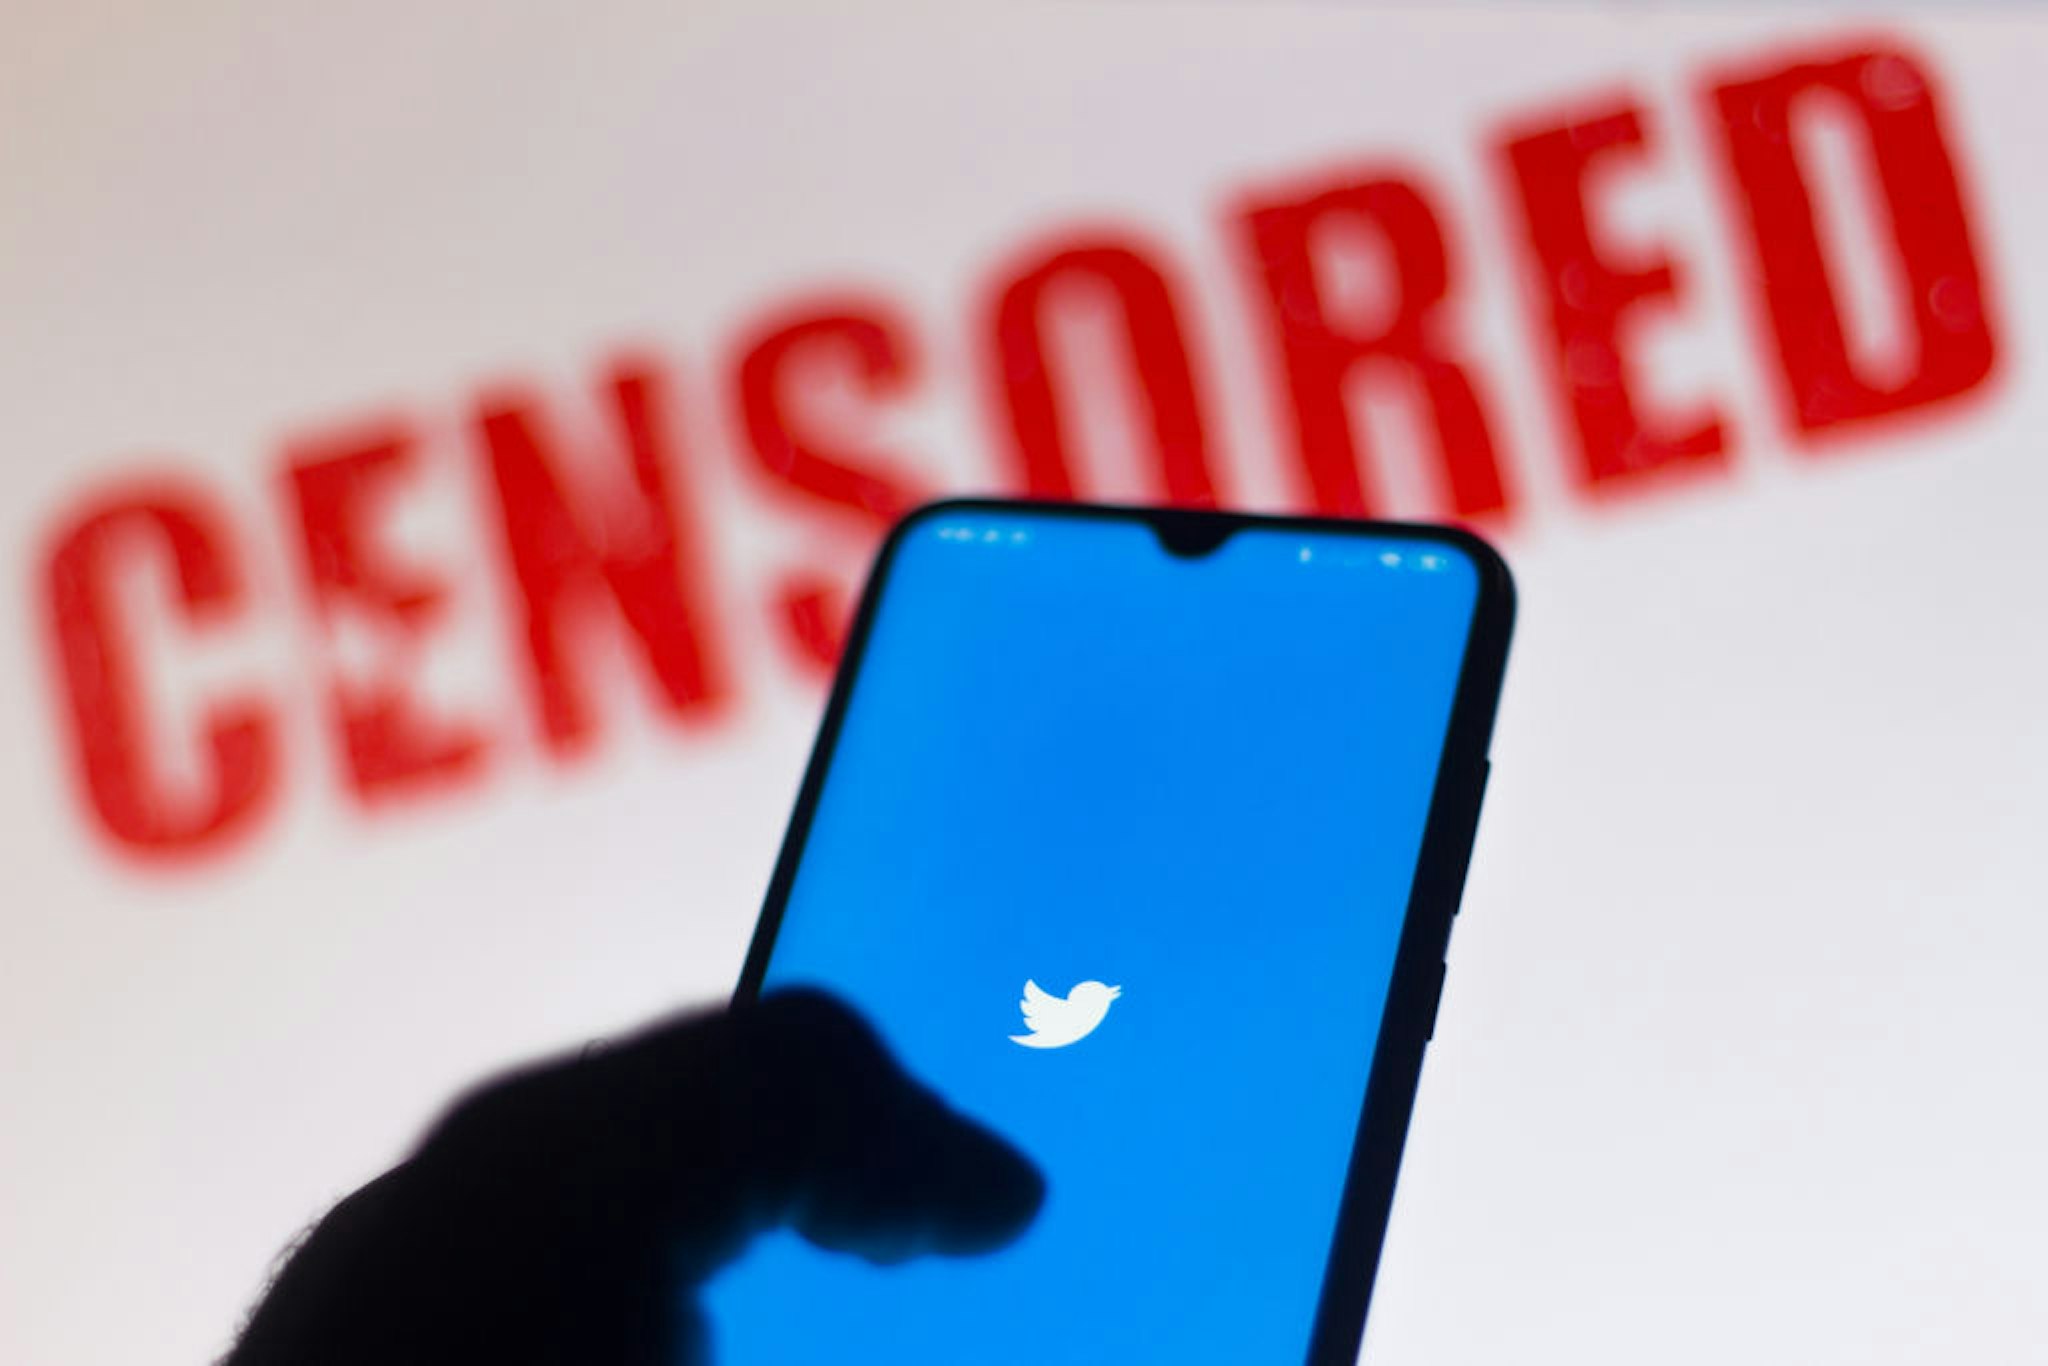 BRAZIL - 2020/06/15: In this photo illustration the Twitter logo is displayed on a smartphone and a red alerting word "CENSORED" on the blurred background. (Photo Illustration by Rafael Henrique/SOPA Images/LightRocket via Getty Images)